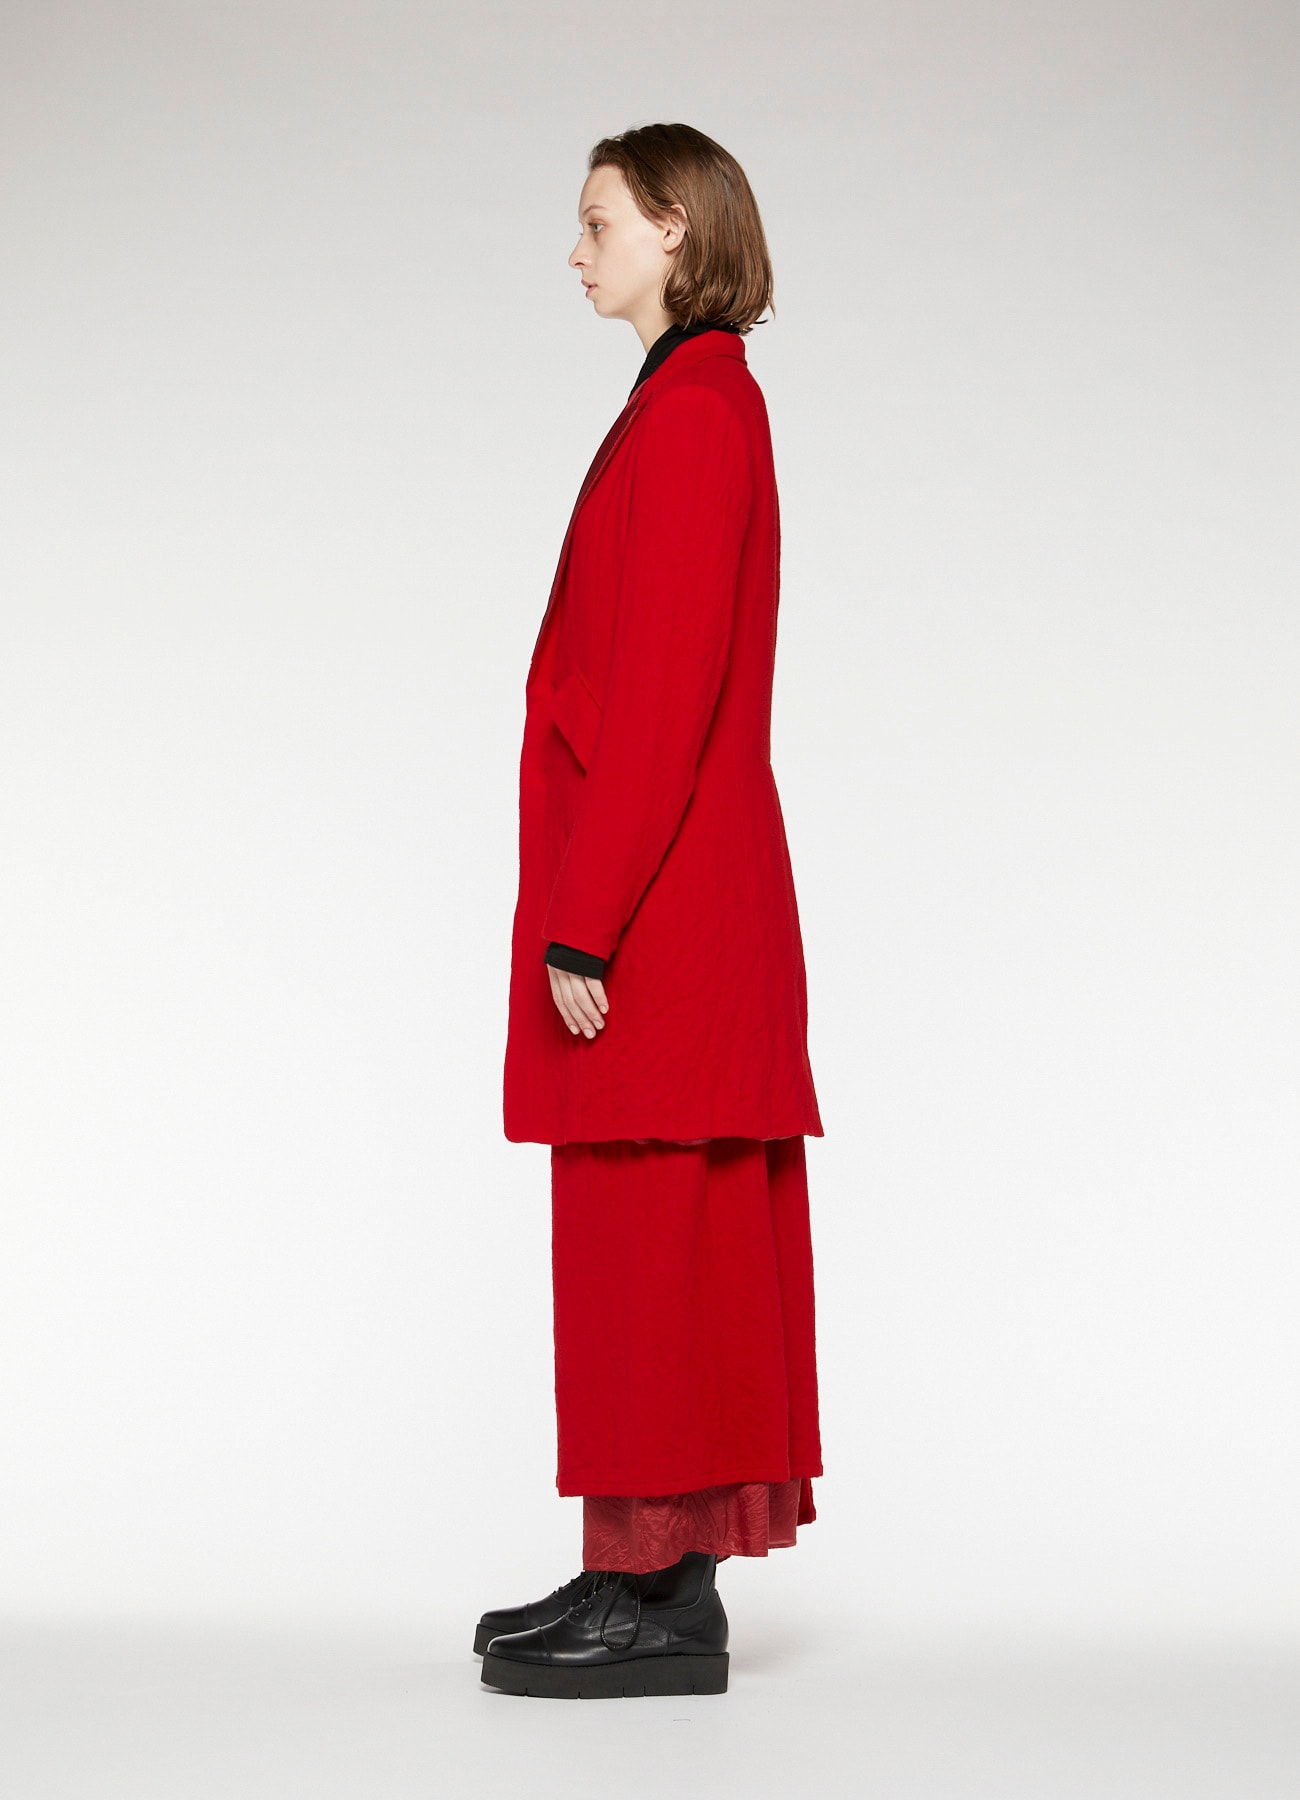 WOOL ROUGH TWILL GARMENT MILLING LONG TAILORED JACKETXS Red